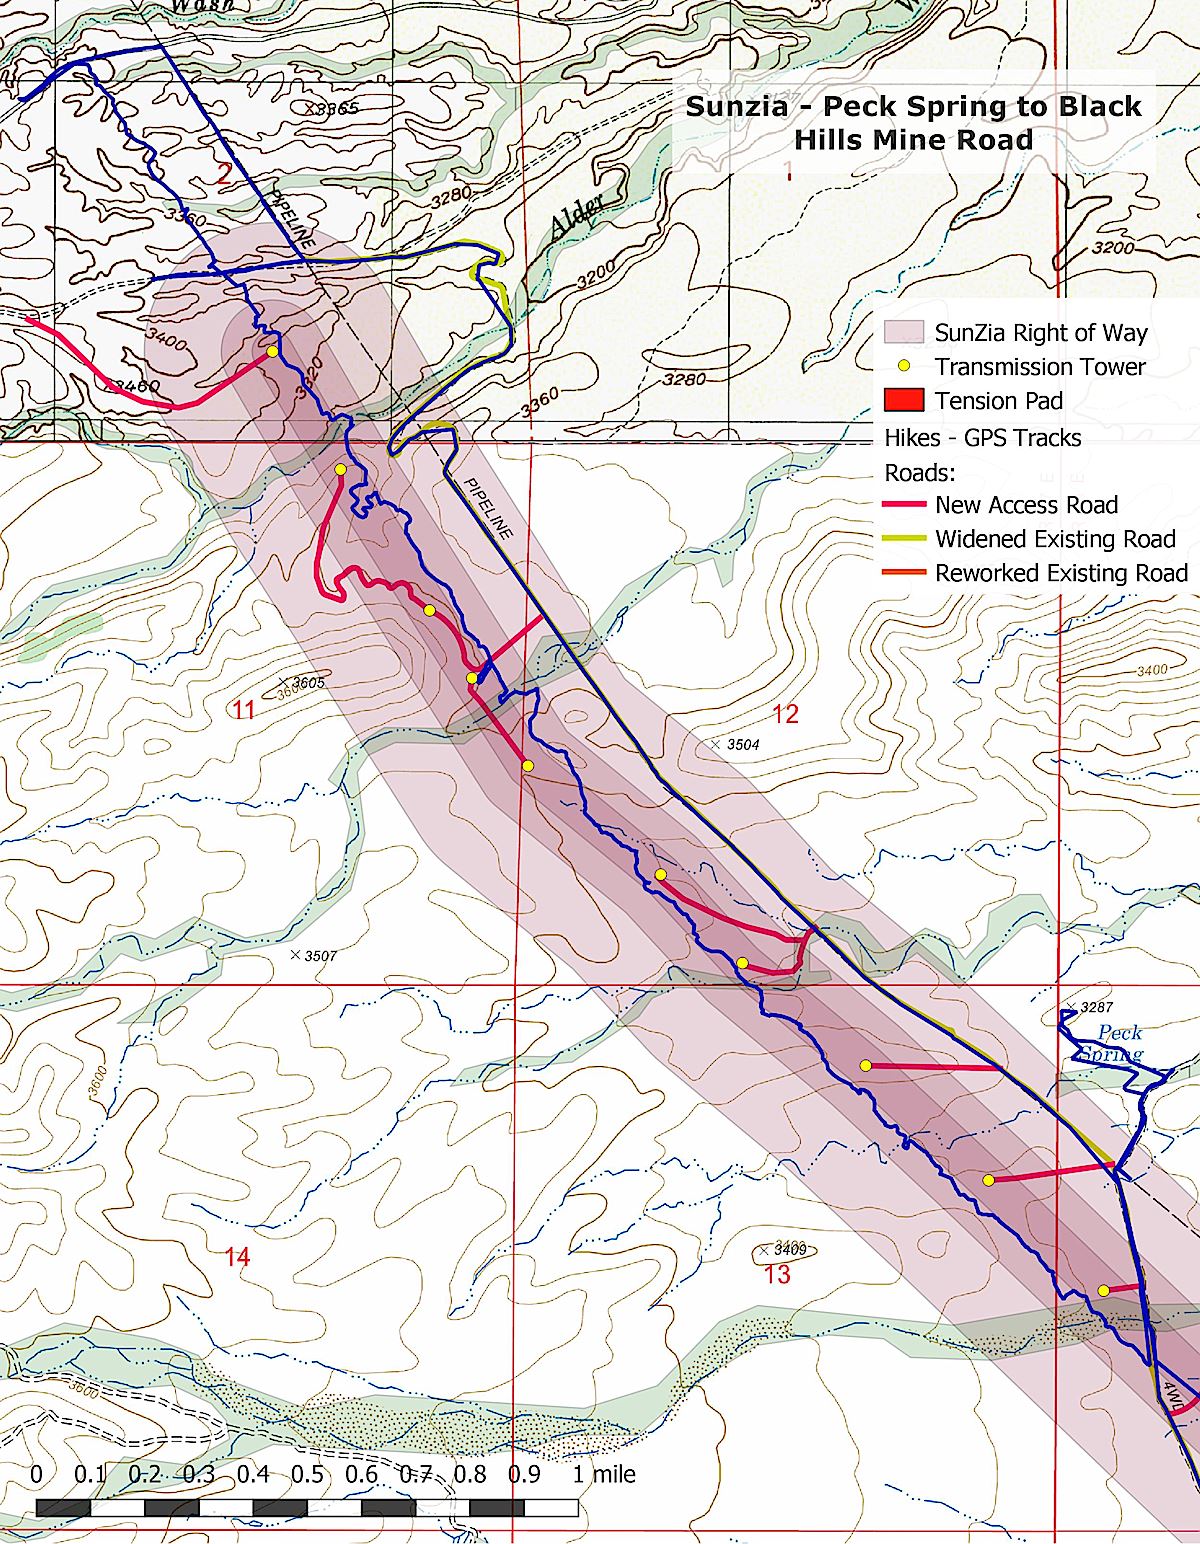 SunZia Route Map - Peck Canyon to Black Hills Mine Road. February 2019.